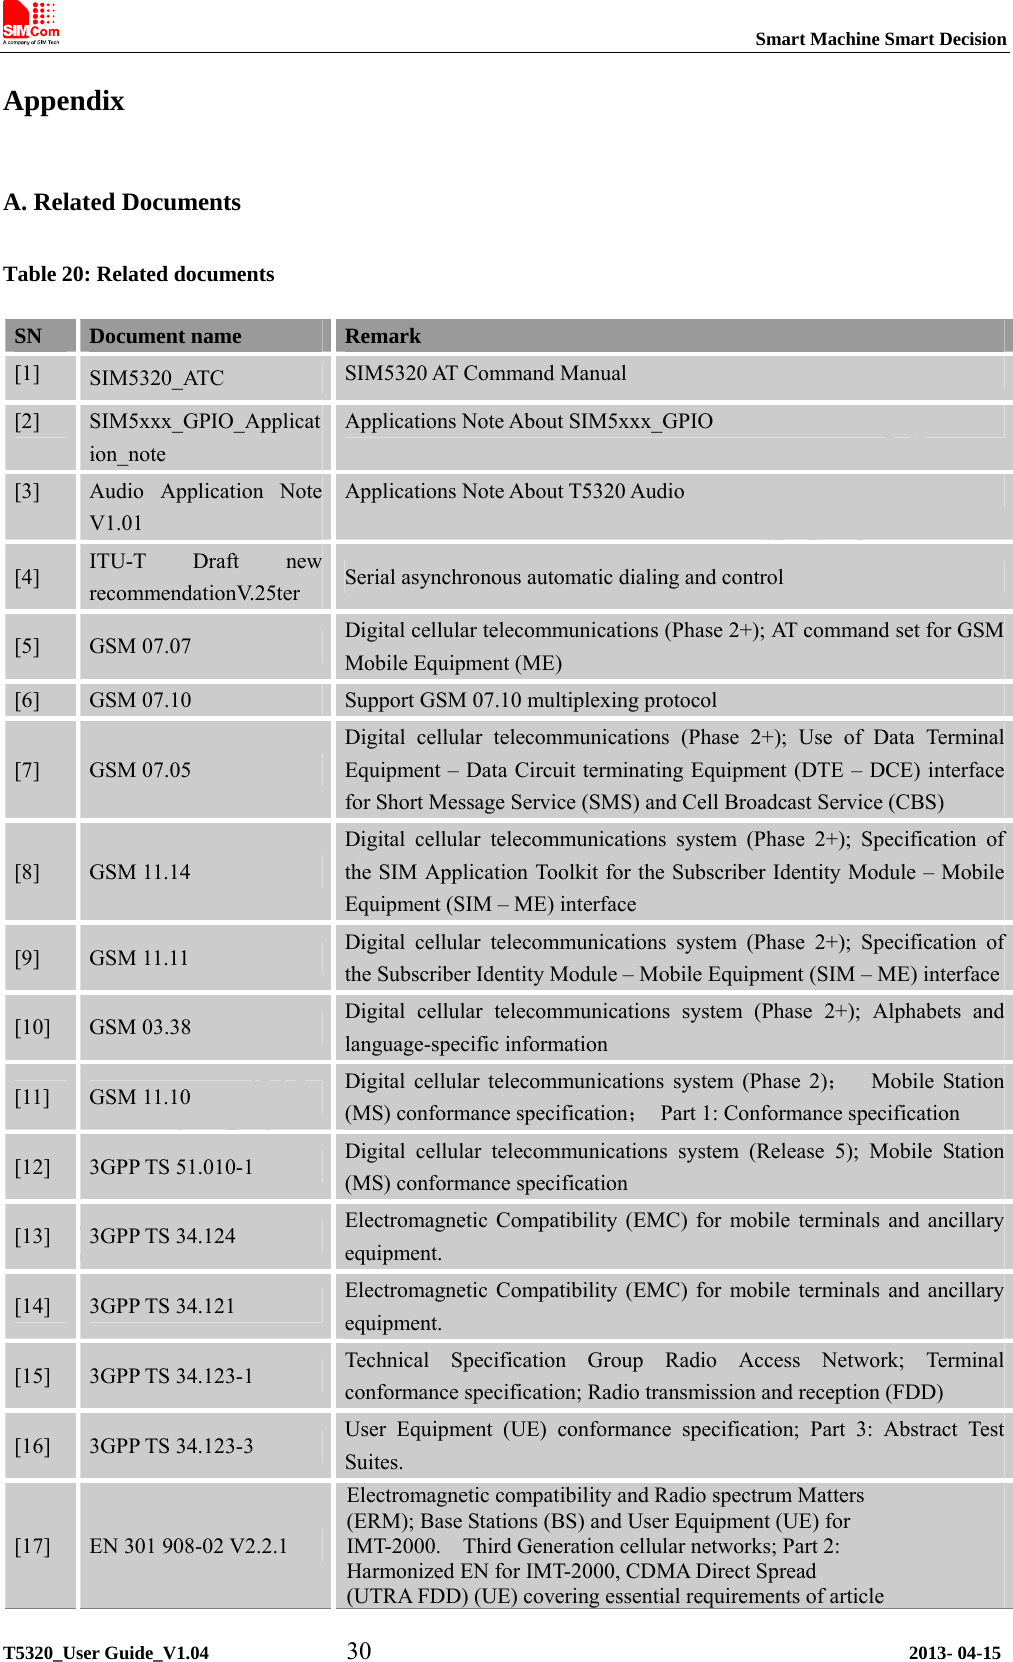                                                                           Smart Machine Smart Decision             T5320_User Guide_V1.04           30                                           2013- 04-15 Appendix A. Related Documents Table 20: Related documents SN  Document name  Remark [1]  SIM5320_ATC  SIM5320 AT Command Manual [2]  SIM5xxx_GPIO_Application_note Applications Note About SIM5xxx_GPIO [3]  Audio Application Note V1.01 Applications Note About T5320 Audio [4]  ITU-T Draft new recommendationV.25ter  Serial asynchronous automatic dialing and control [5]  GSM 07.07  Digital cellular telecommunications (Phase 2+); AT command set for GSM Mobile Equipment (ME) [6]  GSM 07.10  Support GSM 07.10 multiplexing protocol   [7]  GSM 07.05 Digital cellular telecommunications (Phase 2+); Use of Data Terminal Equipment – Data Circuit terminating Equipment (DTE – DCE) interface for Short Message Service (SMS) and Cell Broadcast Service (CBS) [8]  GSM 11.14 Digital cellular telecommunications system (Phase 2+); Specification of the SIM Application Toolkit for the Subscriber Identity Module – Mobile Equipment (SIM – ME) interface [9]  GSM 11.11  Digital cellular telecommunications system (Phase 2+); Specification of the Subscriber Identity Module – Mobile Equipment (SIM – ME) interface[10]  GSM 03.38  Digital cellular telecommunications system (Phase 2+); Alphabets and language-specific information [11]  GSM 11.10  Digital cellular telecommunications system (Phase 2)；  Mobile Station (MS) conformance specification；  Part 1: Conformance specification [12]  3GPP TS 51.010-1  Digital cellular telecommunications system (Release 5); Mobile Station (MS) conformance specification [13]  3GPP TS 34.124  Electromagnetic Compatibility (EMC) for mobile terminals and ancillary equipment. [14]  3GPP TS 34.121  Electromagnetic Compatibility (EMC) for mobile terminals and ancillary equipment. [15]  3GPP TS 34.123-1  Technical Specification Group Radio Access Network; Terminal conformance specification; Radio transmission and reception (FDD) [16]  3GPP TS 34.123-3  User Equipment (UE) conformance specification; Part 3: Abstract Test Suites. [17]  EN 301 908-02 V2.2.1 Electromagnetic compatibility and Radio spectrum Matters   (ERM); Base Stations (BS) and User Equipment (UE) for   IMT-2000.    Third Generation cellular networks; Part 2:   Harmonized EN for IMT-2000, CDMA Direct Spread   (UTRA FDD) (UE) covering essential requirements of article   